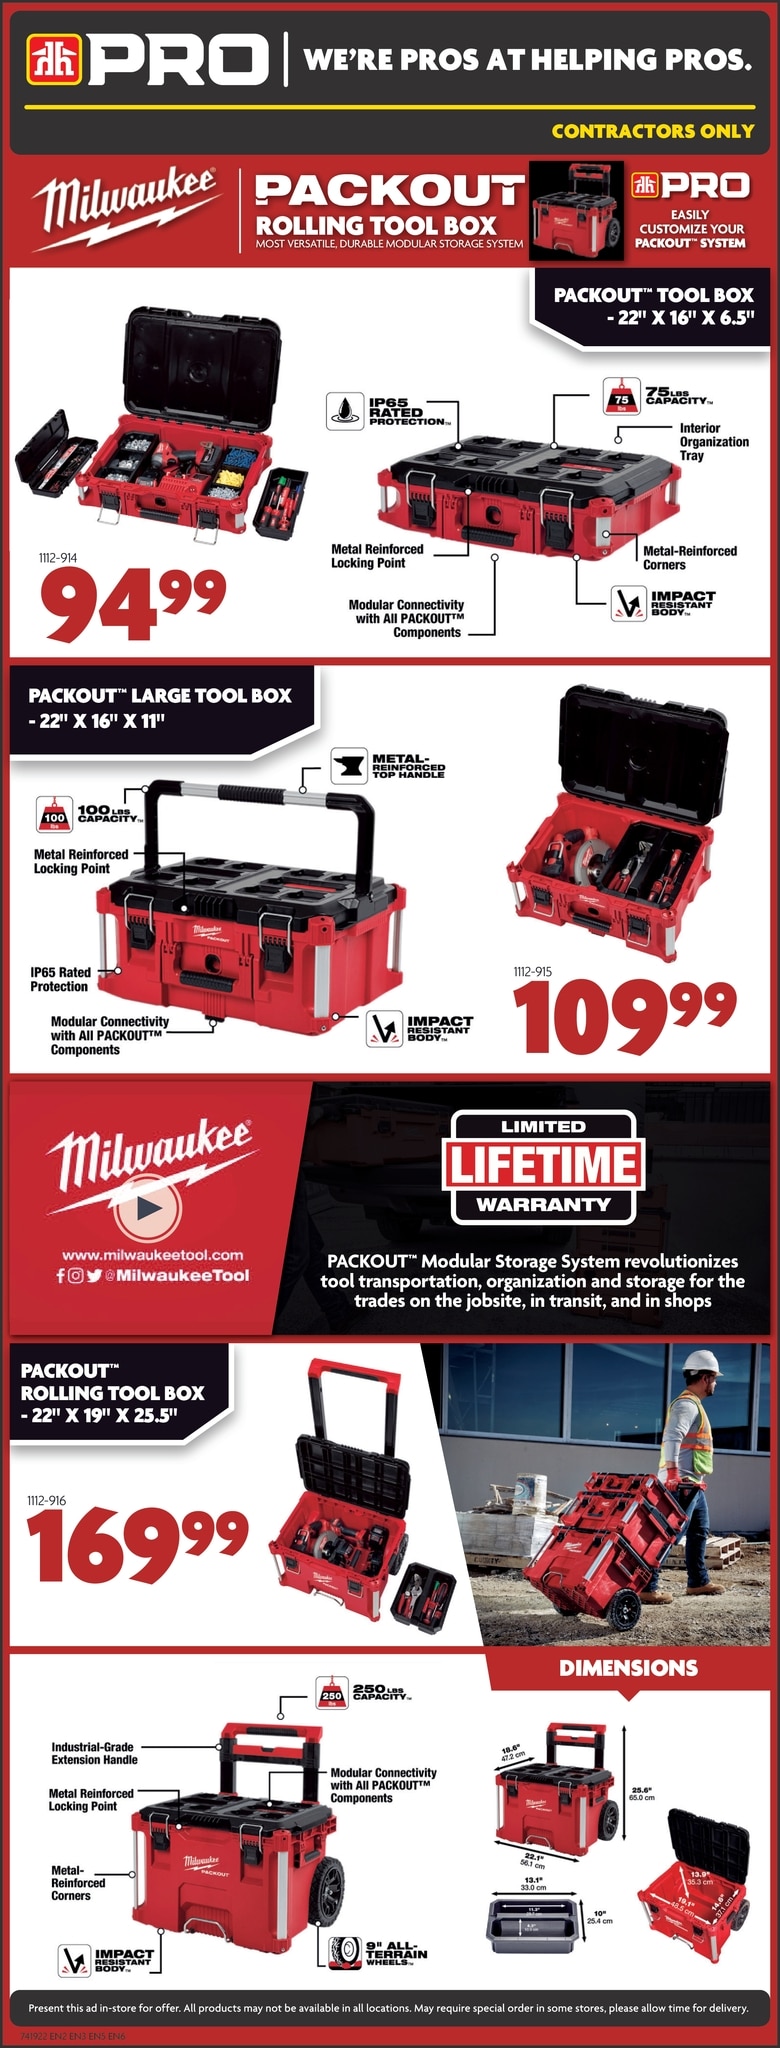 Home Hardware - Building Centre - Page 20